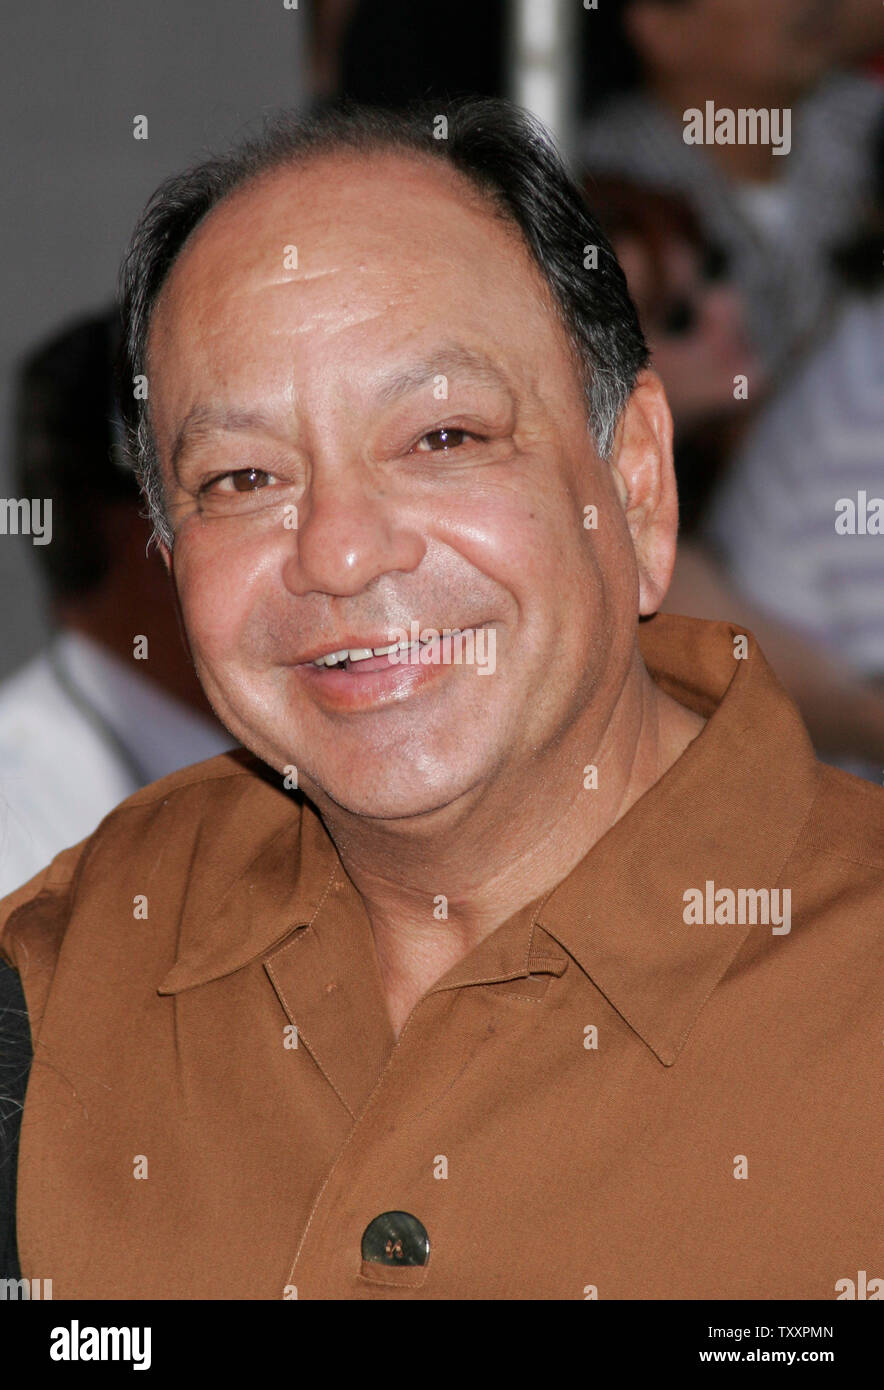 Actor Cheech Marin at the premiere of the new animated film from Pixar, 'The Incredibles' at the El Capitan Theatre in Los Angeles,  October 24, 2004. The film opens in the United States November 5th. (UPI Photo/Francis Specker) Stock Photo